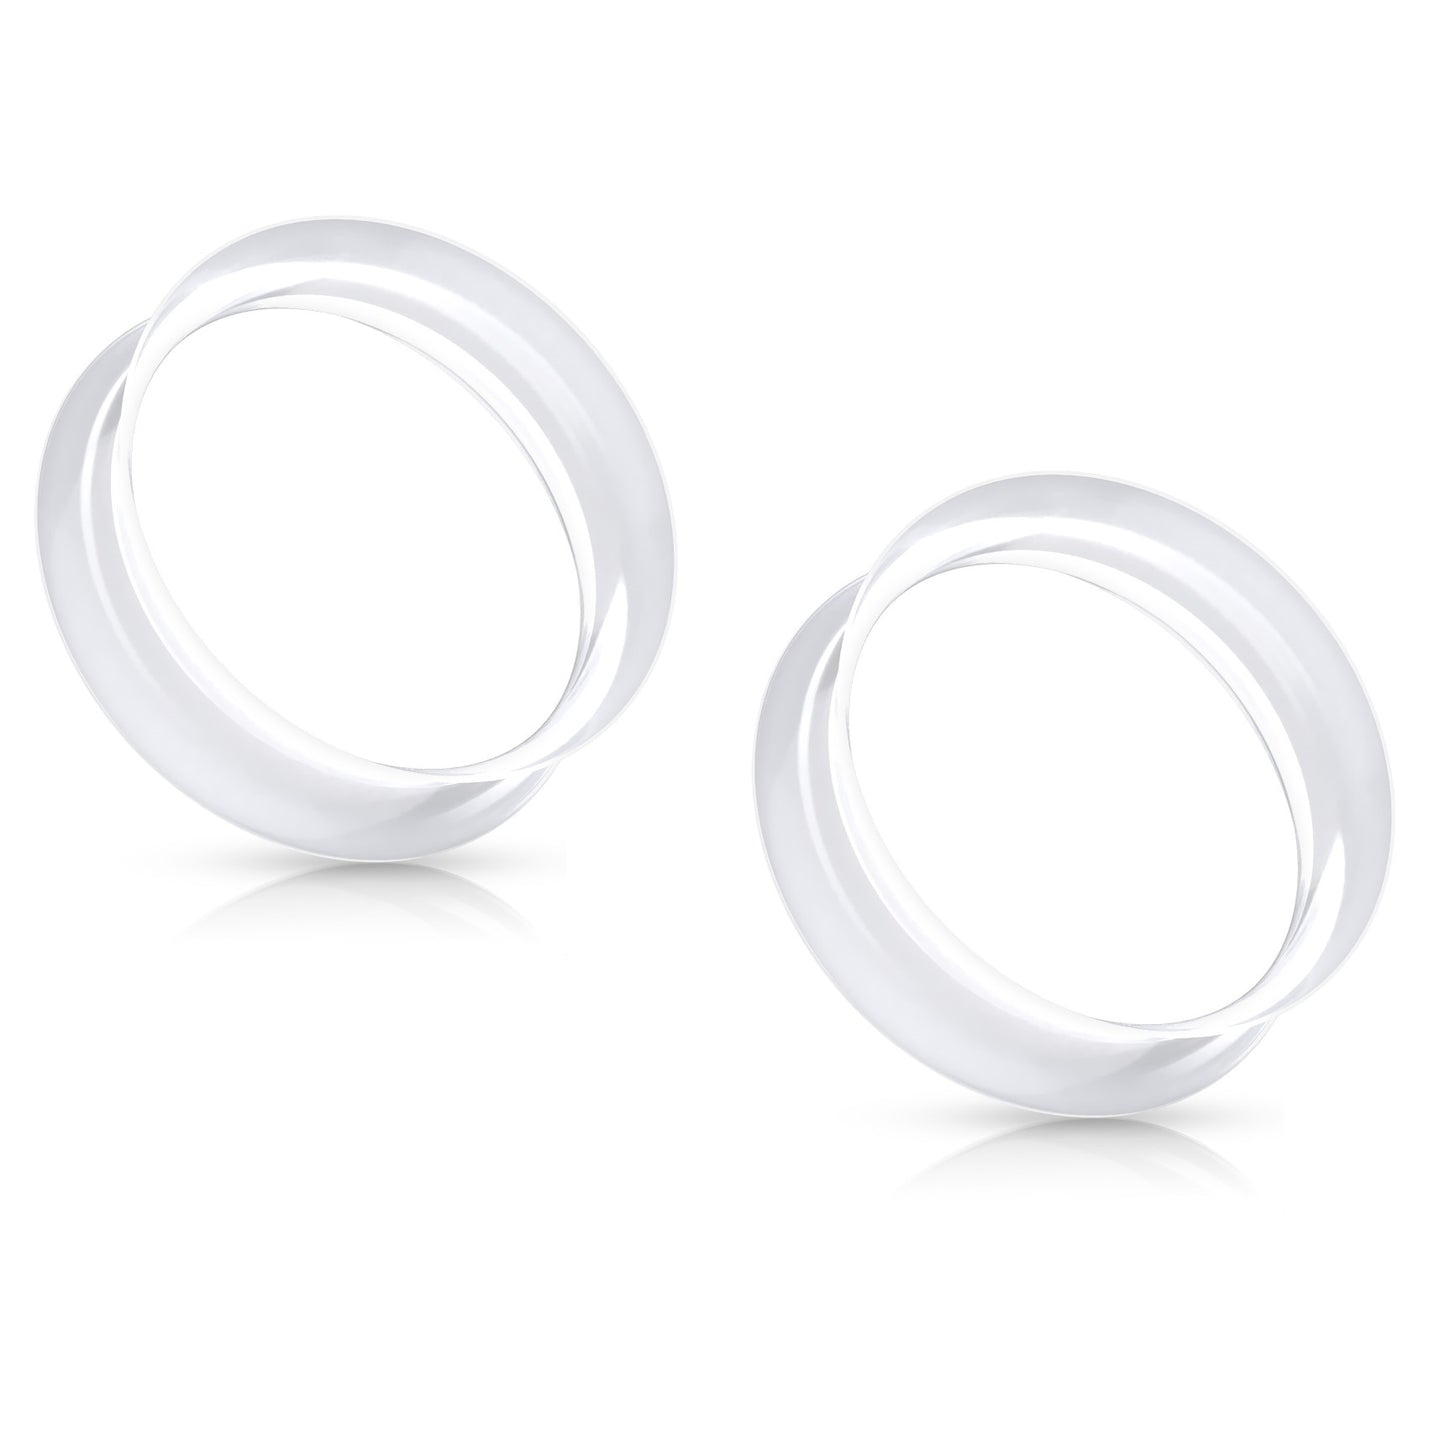 Ultra Thin Silicone Double Flared Saddle Tunnels - Pair